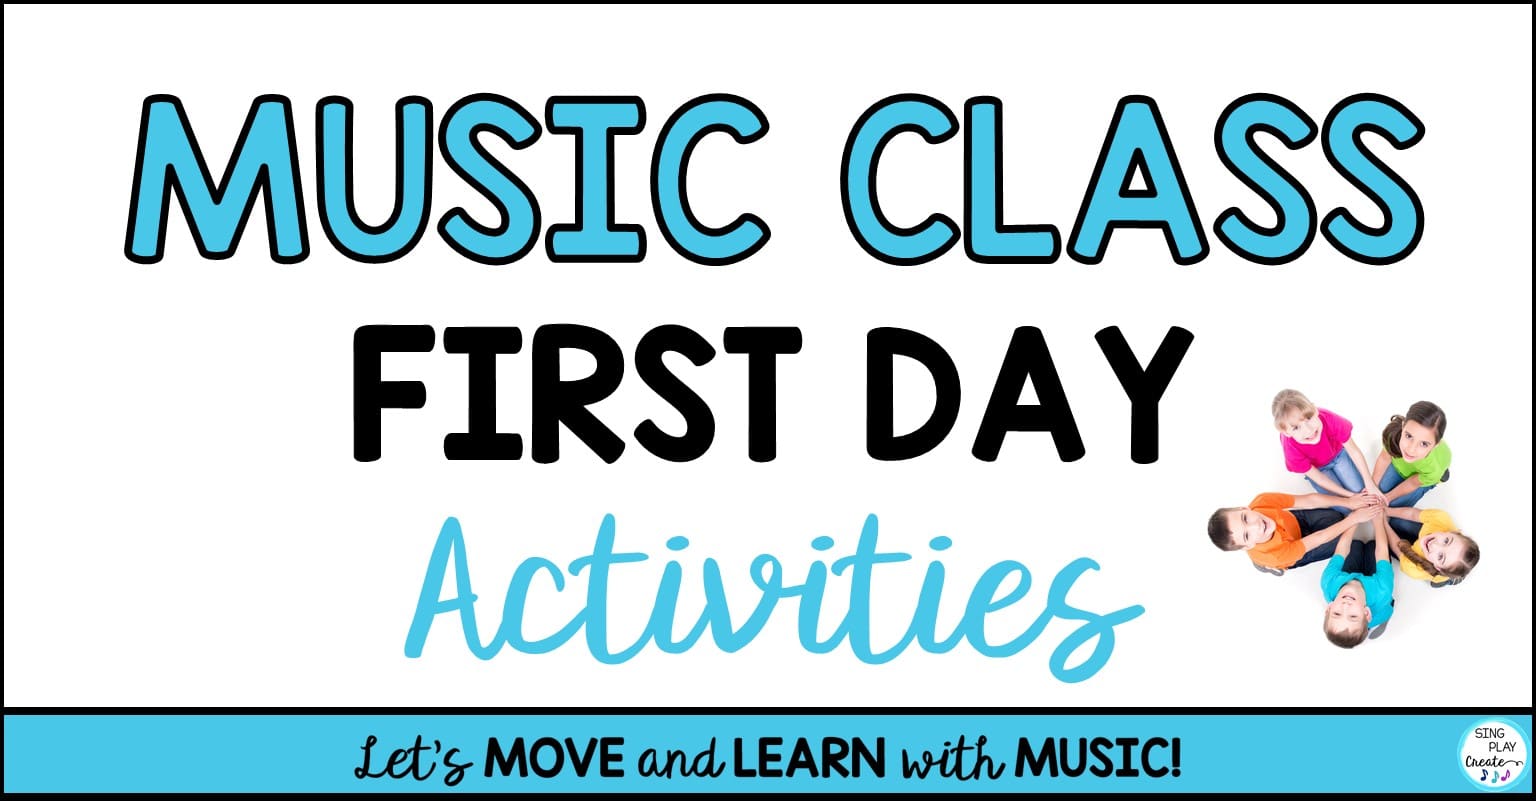 Read more about the article “Music Class First Day Activities”